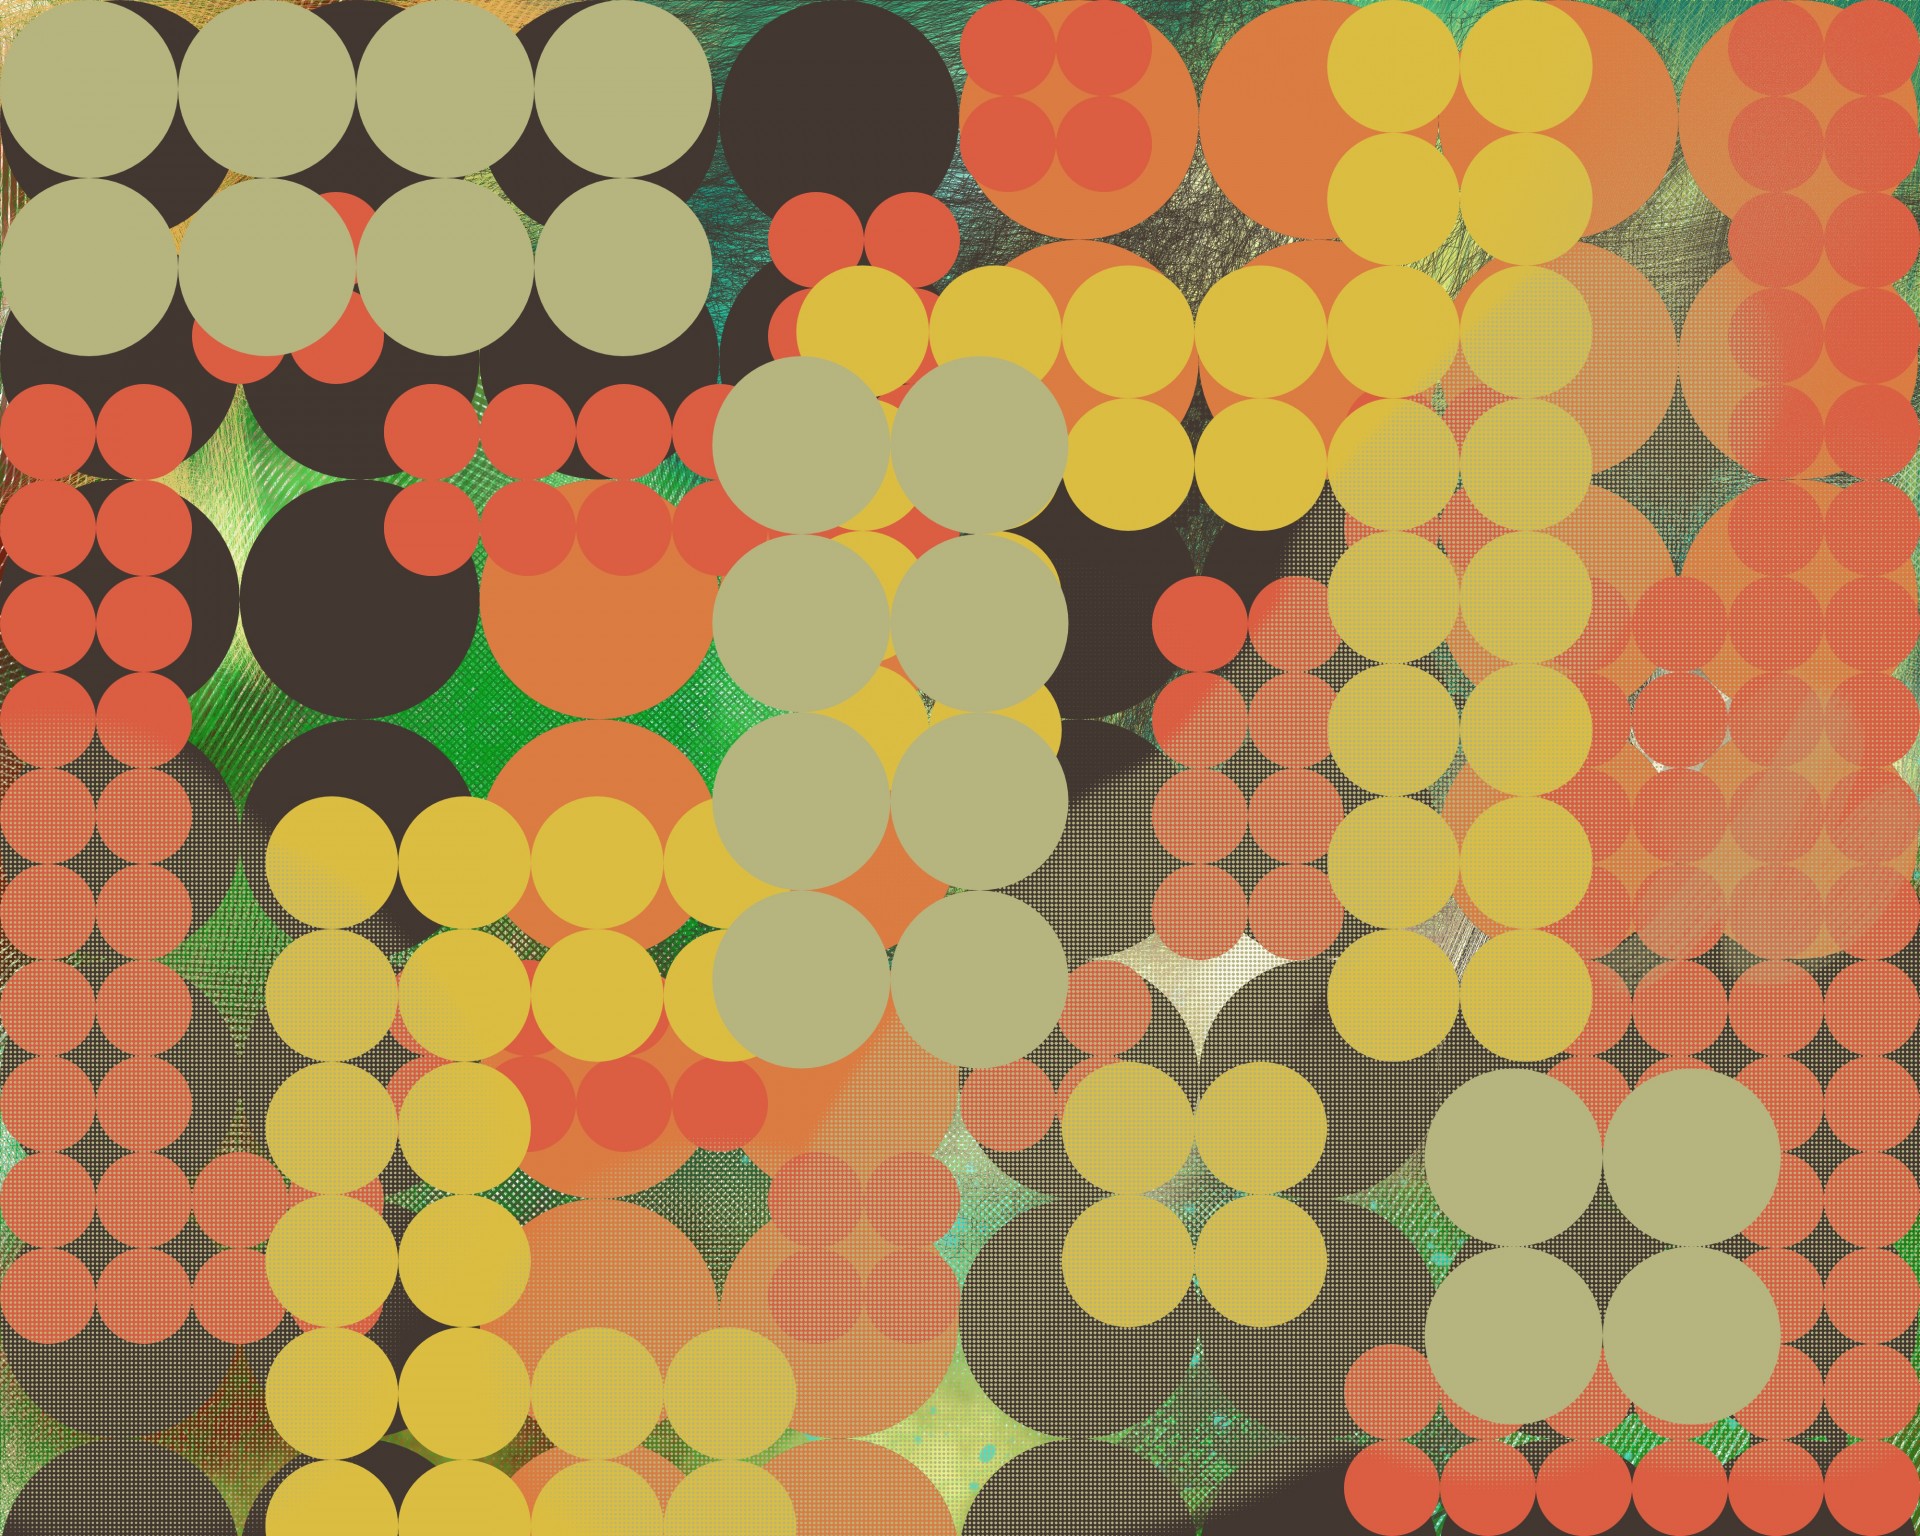 Digitally created abstract background pattern with an urban feel, made up of circles and dots.